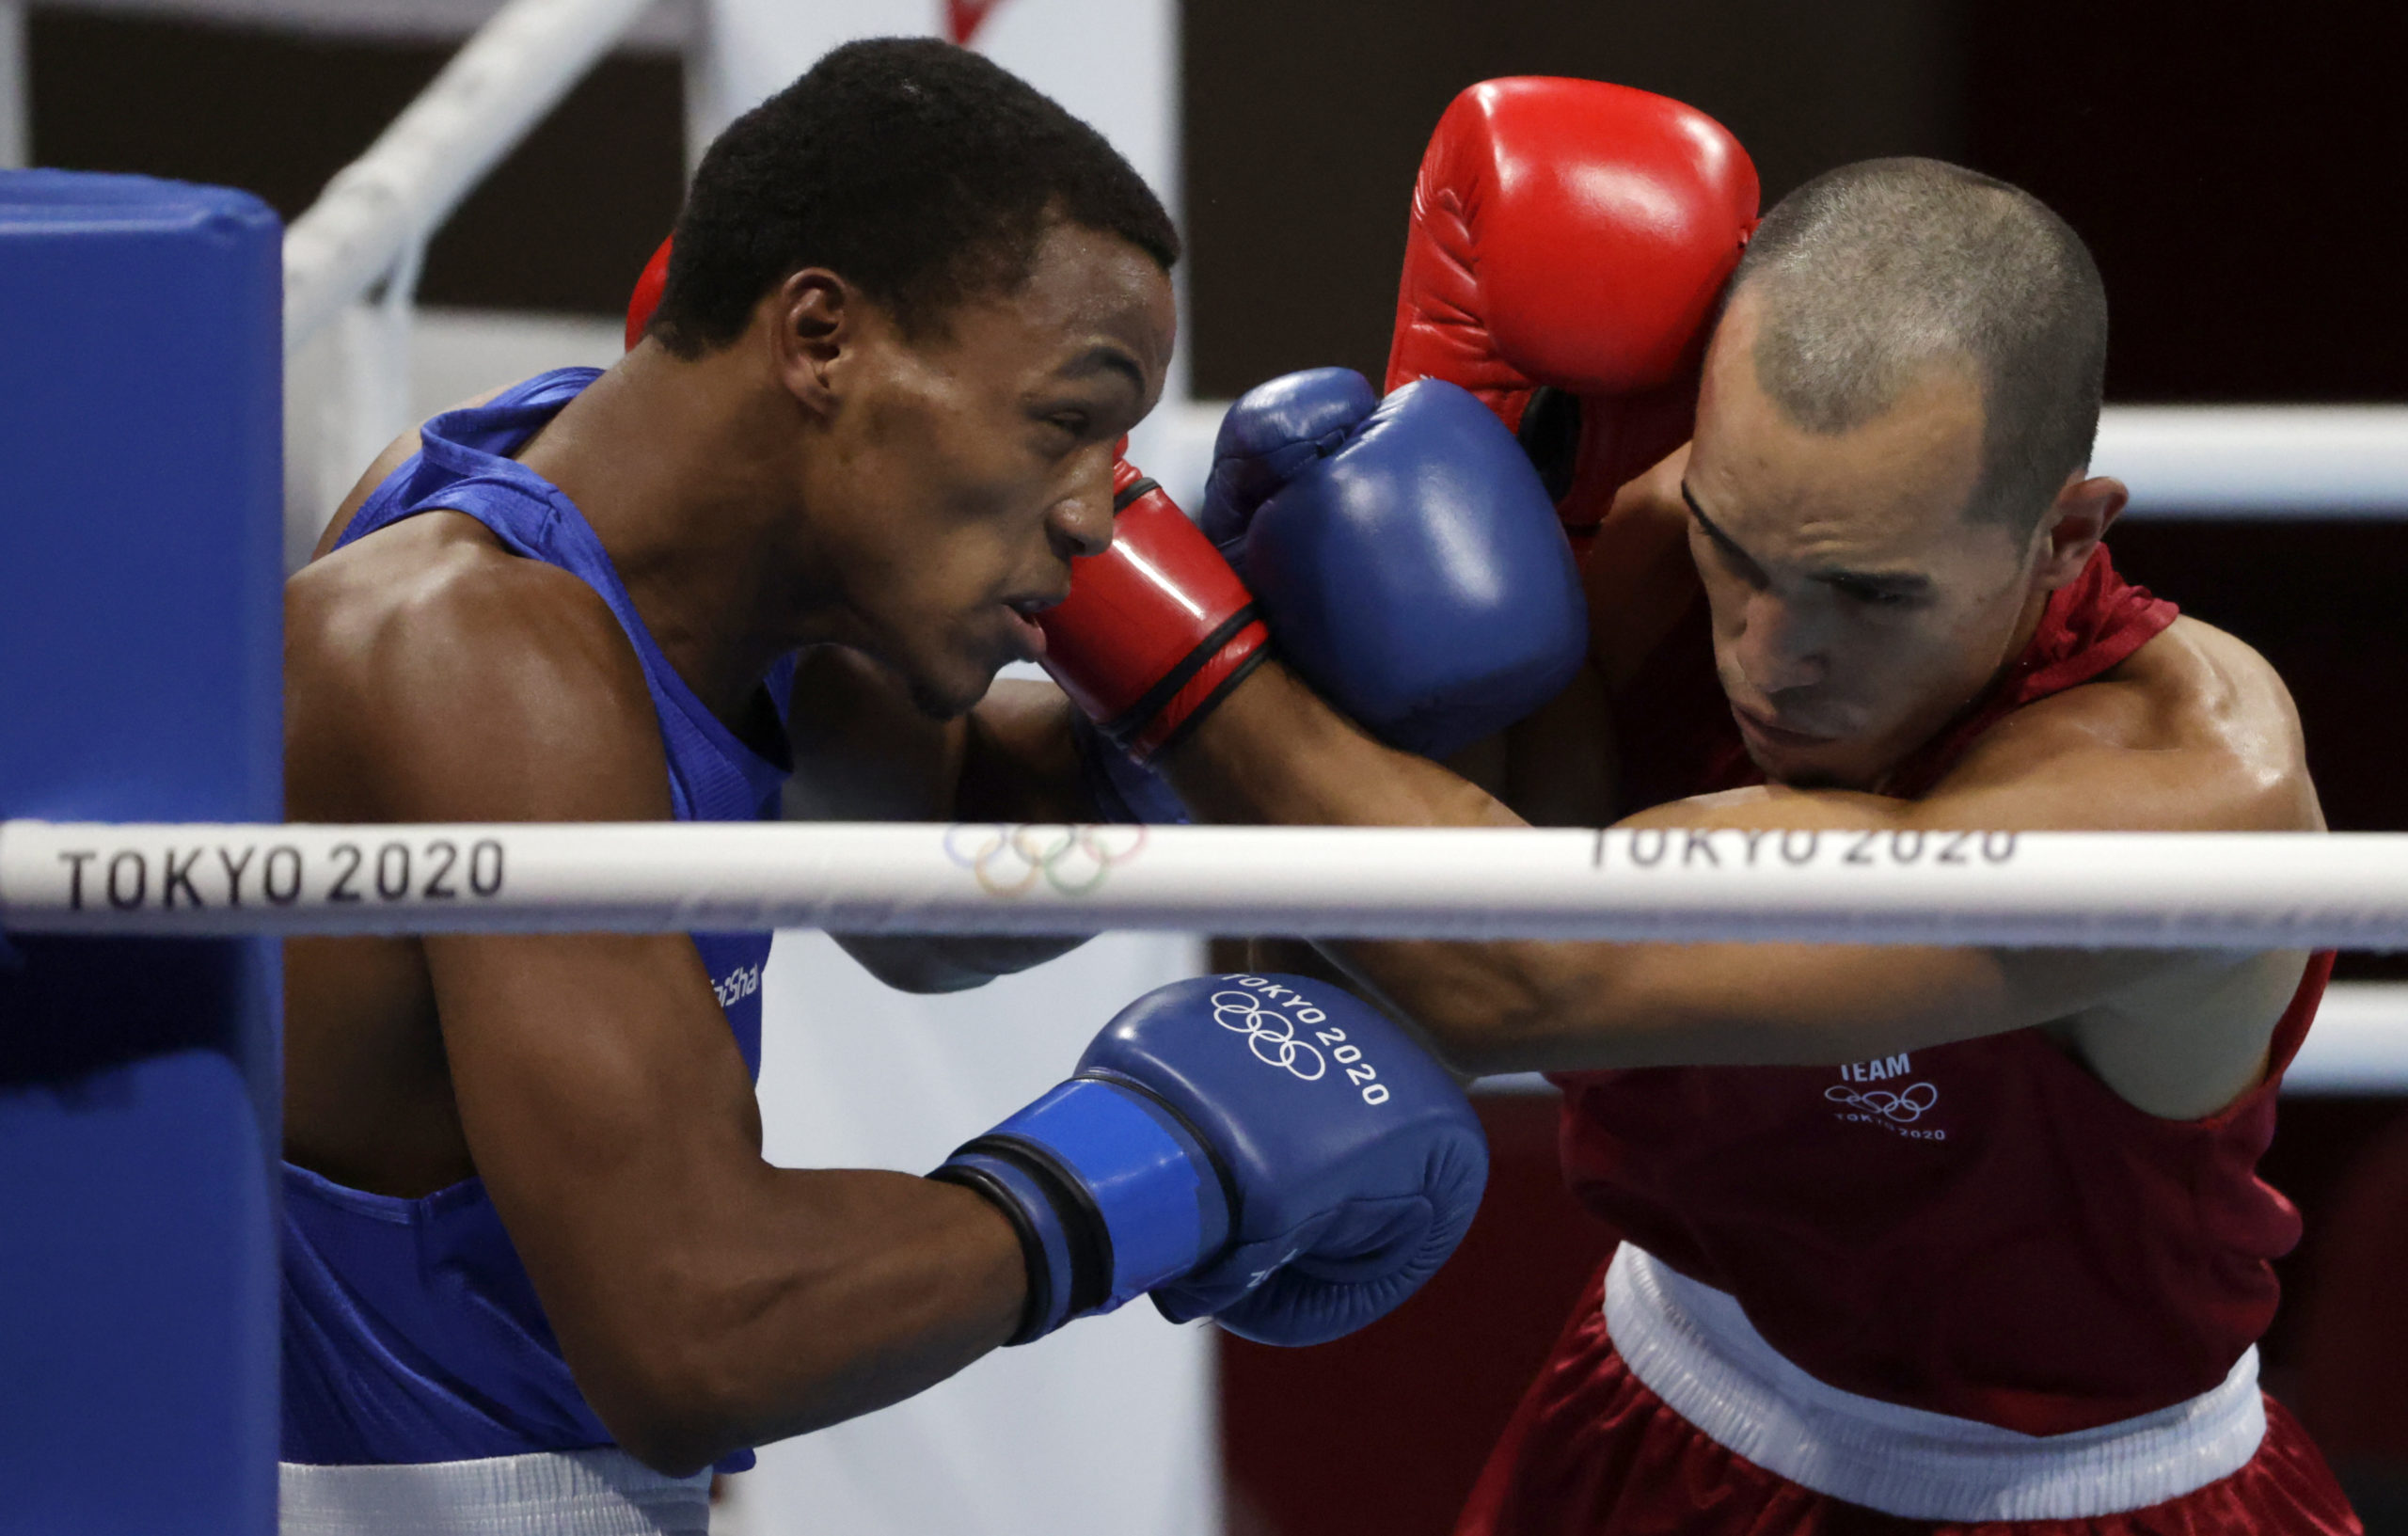 Tokyo 2020 Olympics - Boxing - Men's Middleweight - Last 32 - Kokugikan Arena - Tokyo, Japan - July 26, 2021. Eldric Sella Rodriguez of the Refugee Olympic Team in action against Euri Cedeno Martinez of the Dominican Republic 